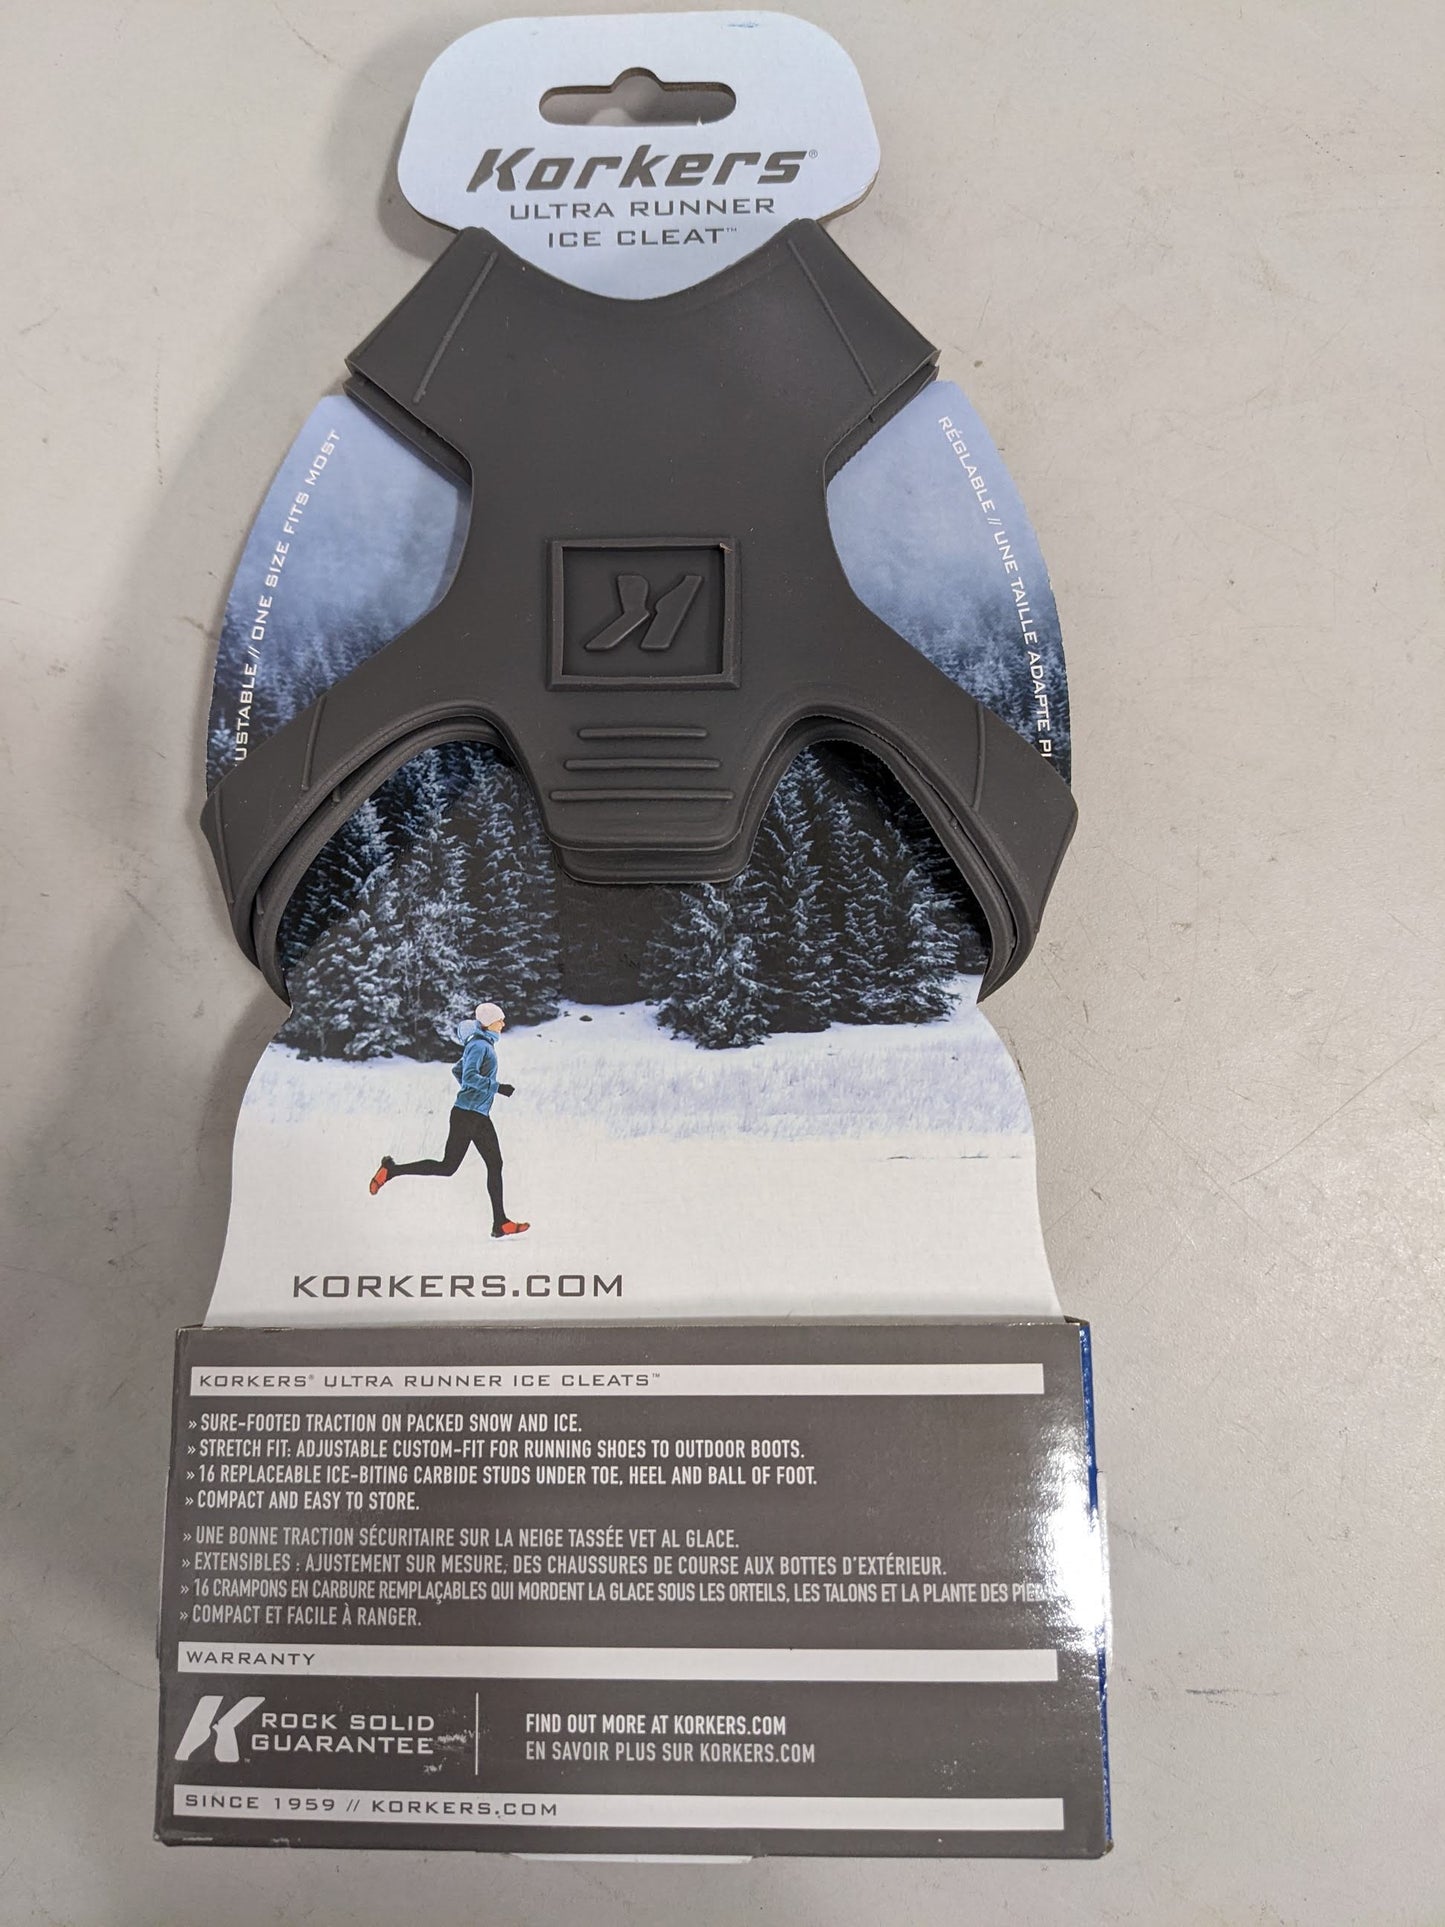 Korkers Ultra Runner Ice Cleats One size Fits Most, Gray New